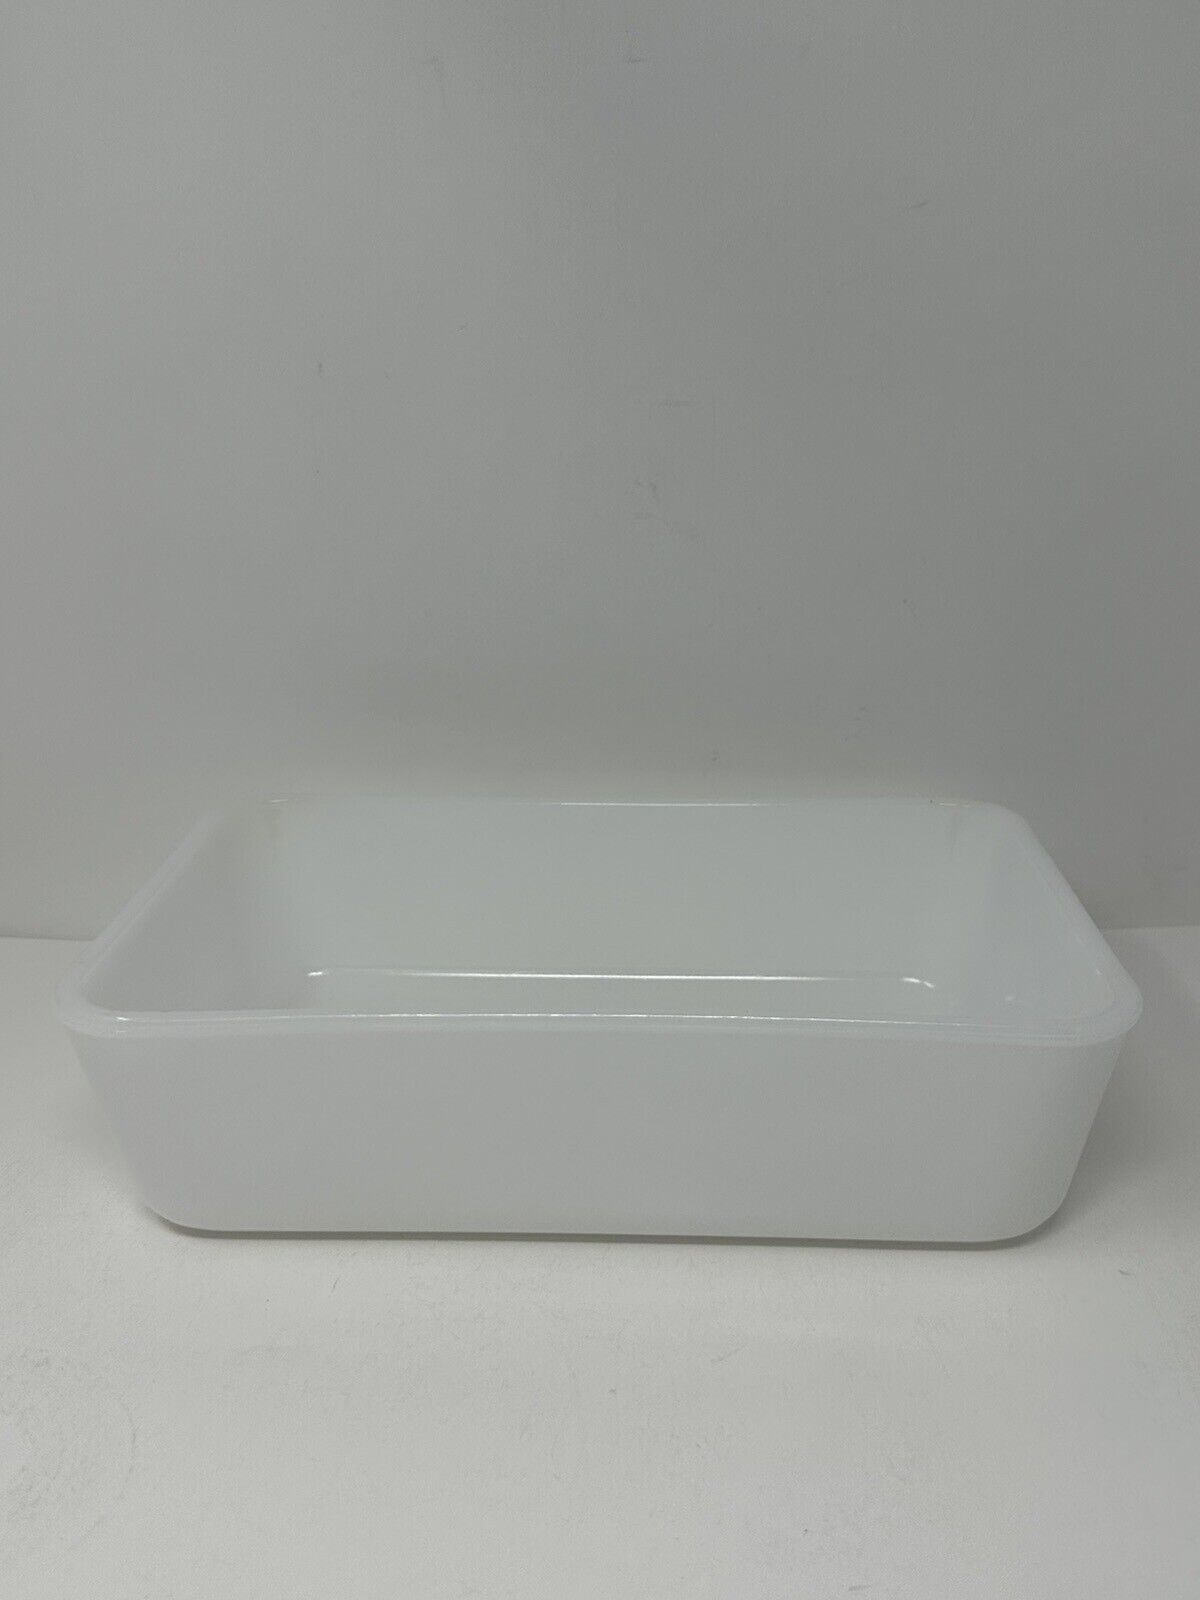 Westinghouse Milk Glass 10 In X 6 In  Baking Dish/Refrigerator Dish ~ Vintage